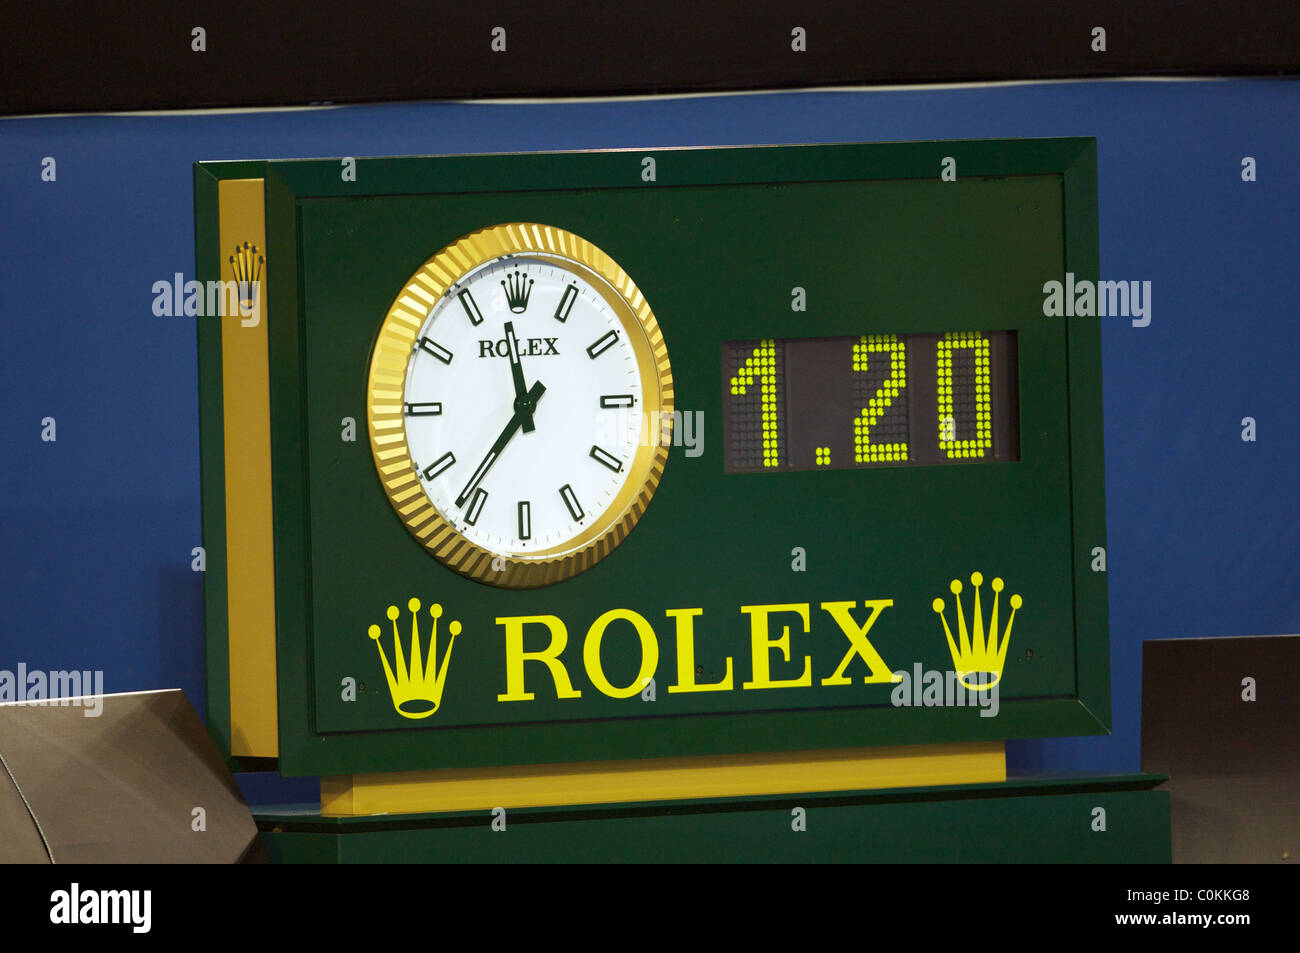 The Rolex clock used at the Australian Open Tennis Tournament Stock